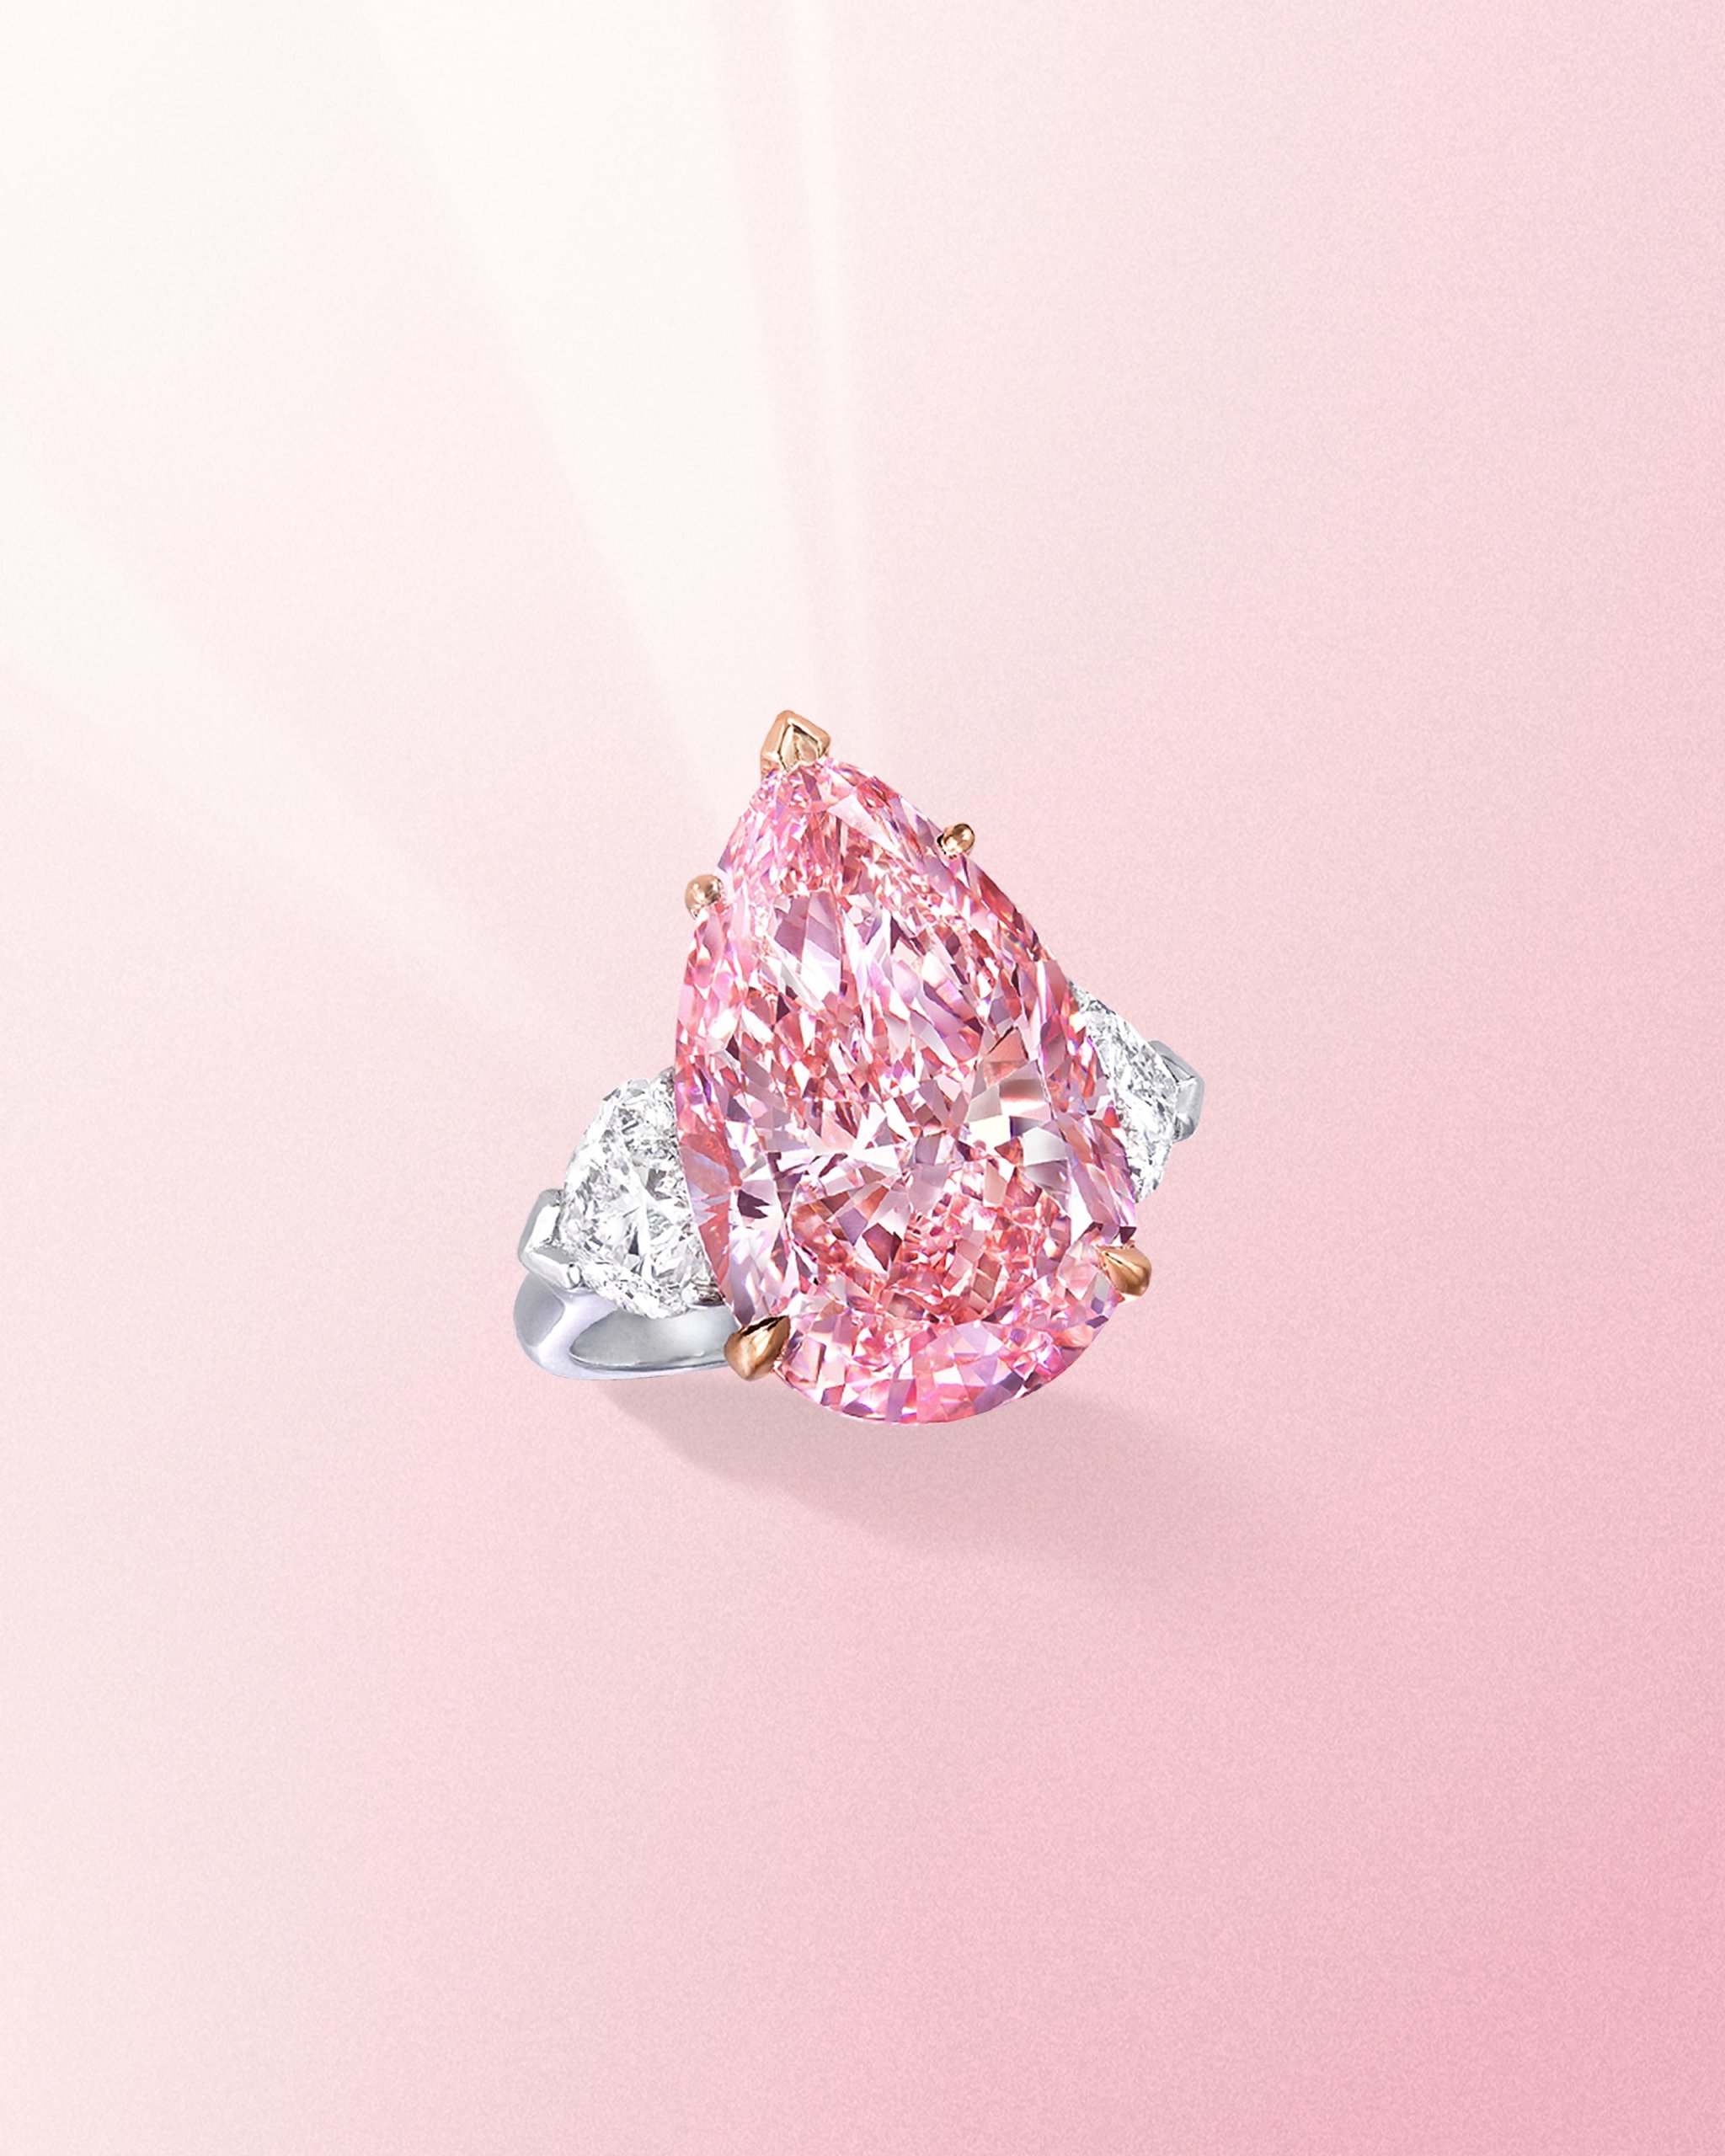 Fancy vivid pear shaped pink diamond ring with side white diamonds on a platinum band from Graff